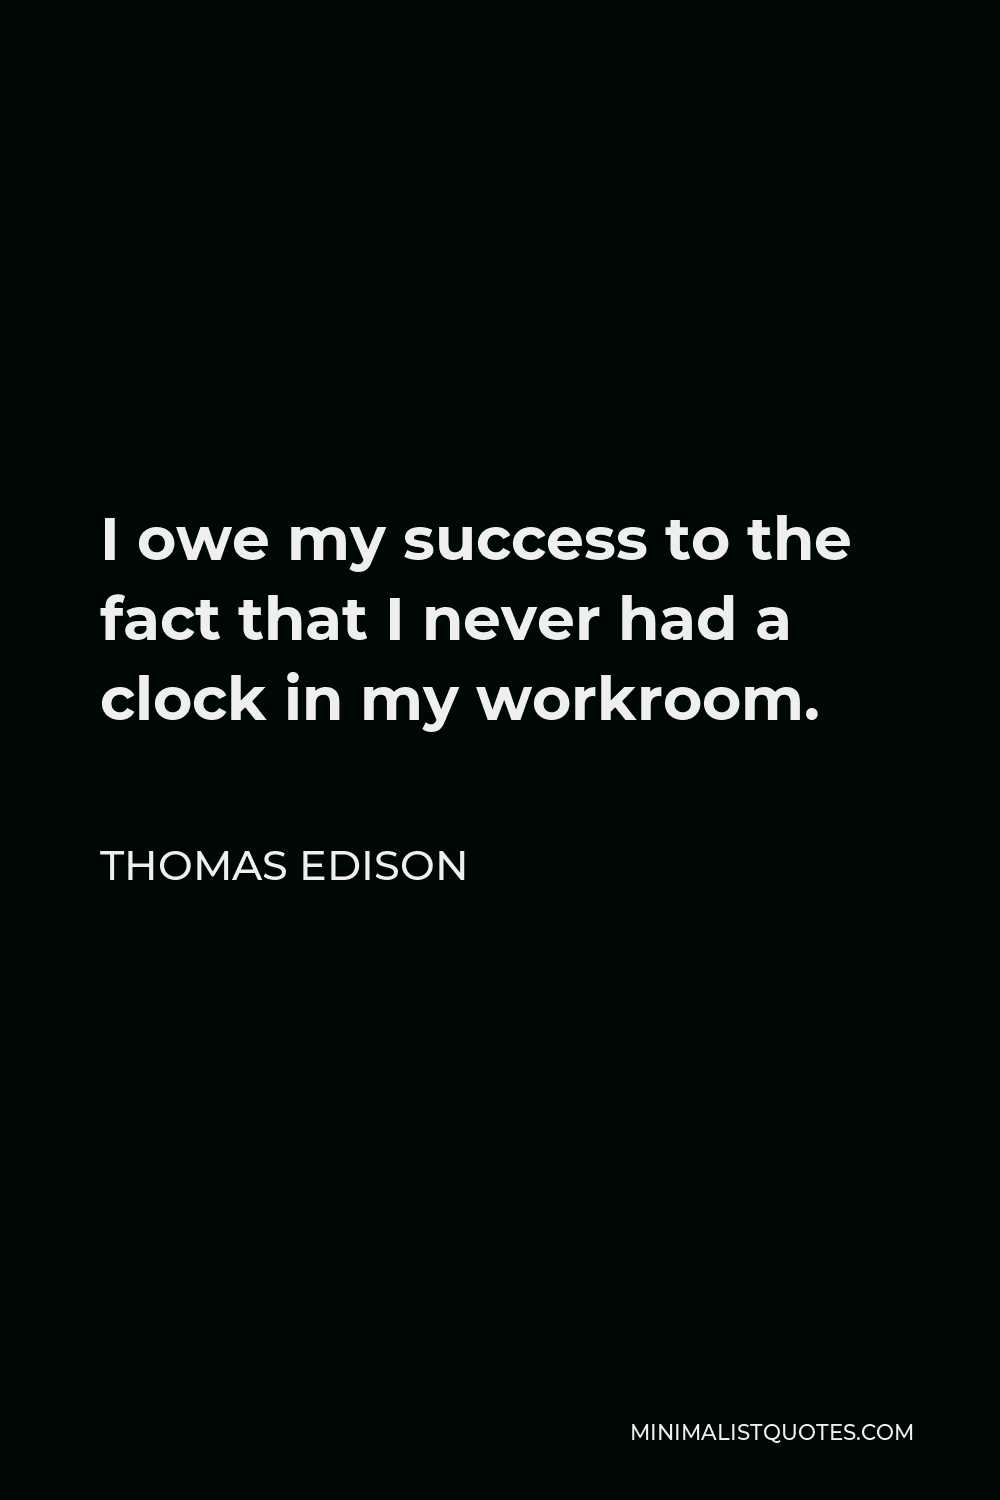 Thomas Edison Quote - I owe my success to the fact that I never had a clock in my workroom.